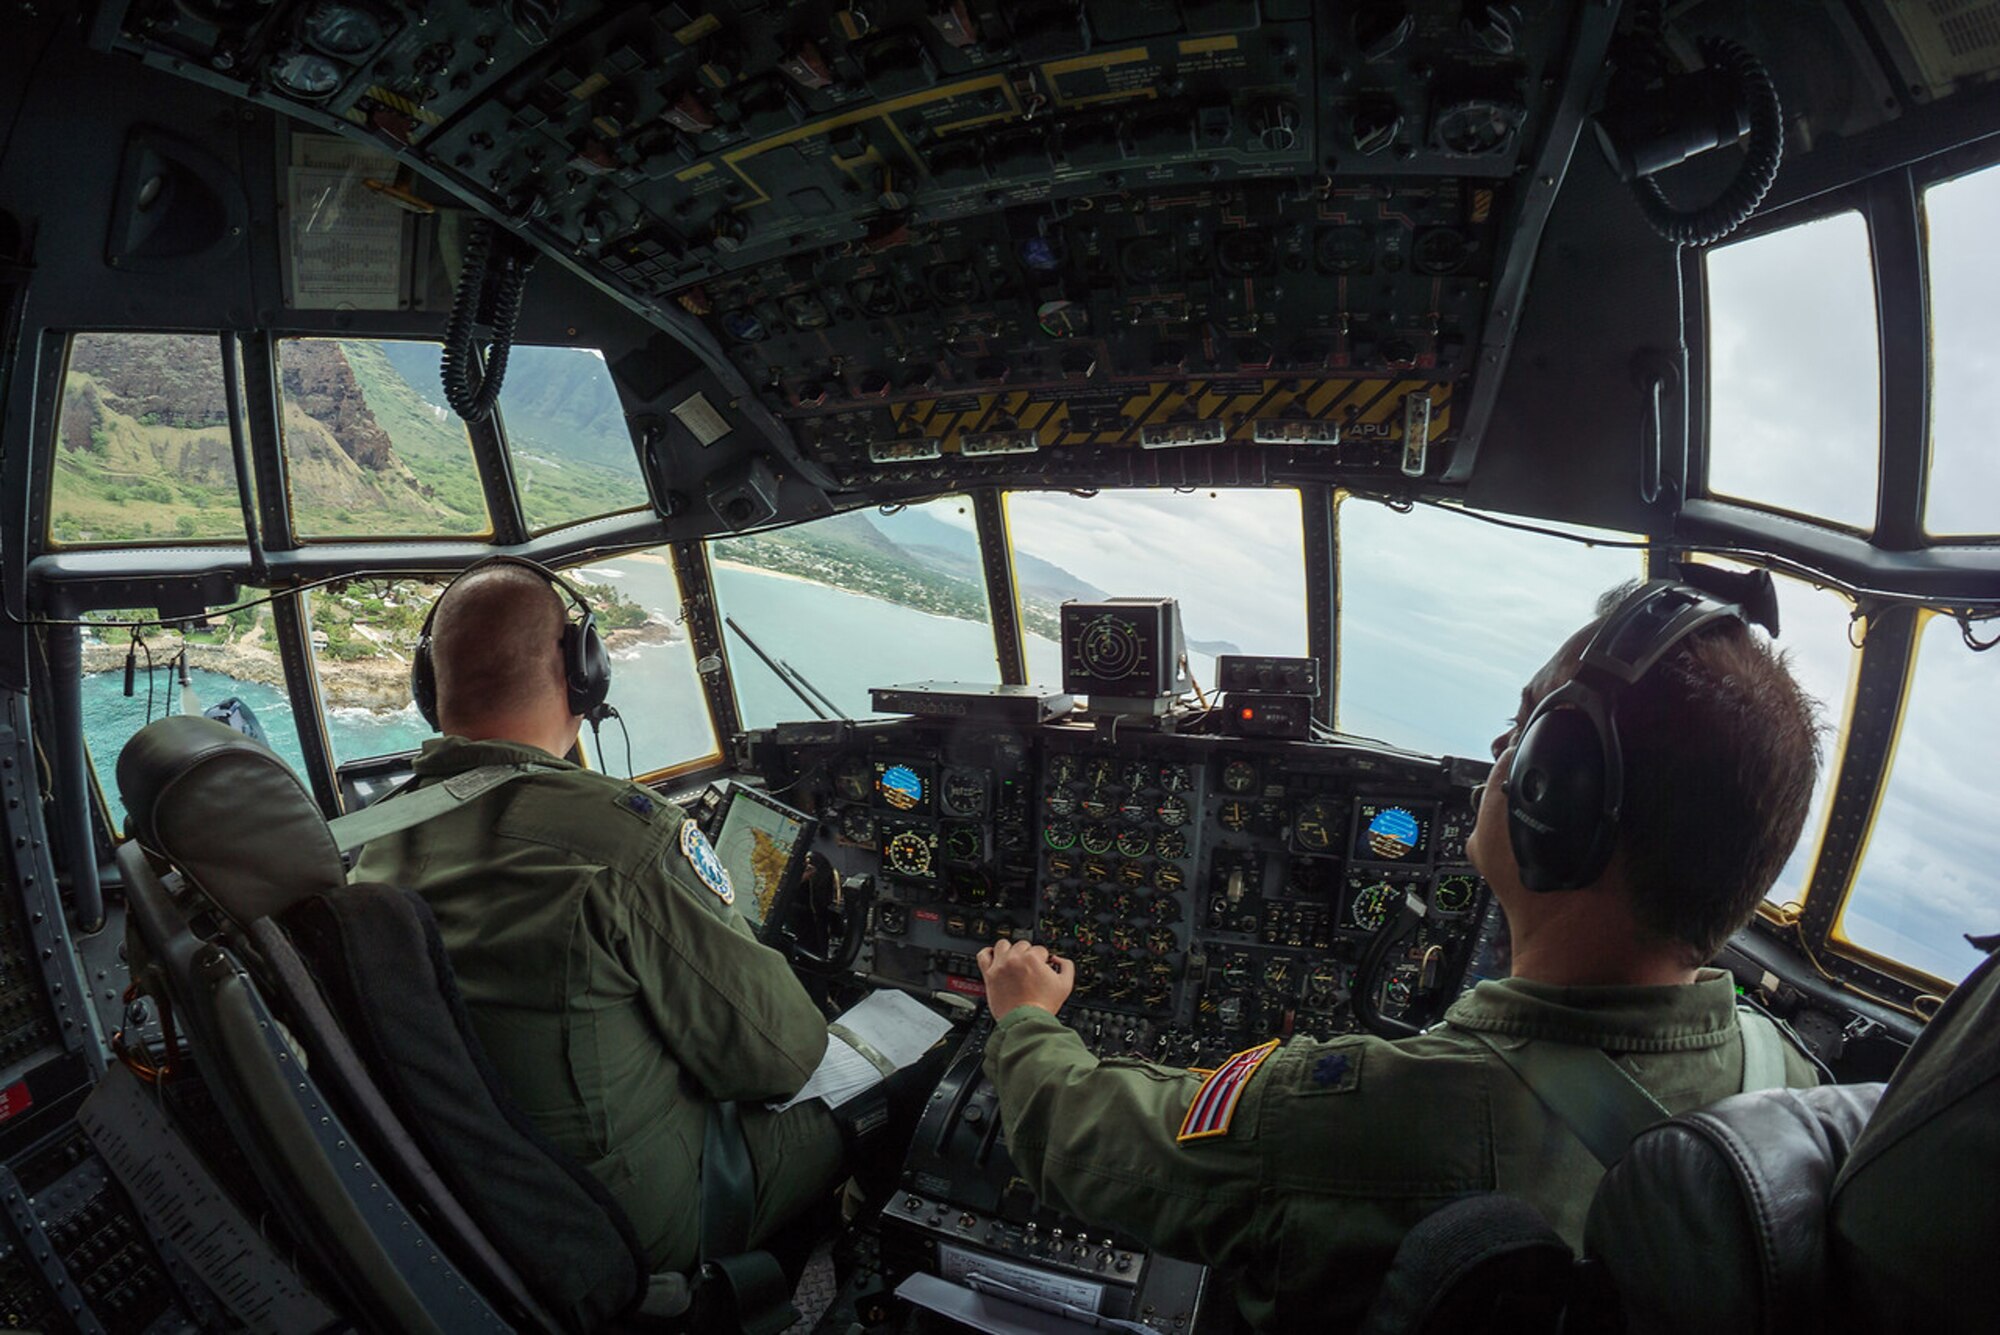 An aircrew from the Kentucky Air National Guard's 165th Airlift Squadron banks a C-130 Hercules over one of the islands of Hawaii during exercise Sentry Aloha Aug. 23, 2016. The Kentucky Air National Guard and multiple other Air Guard units took part in the exercise, which tested multiple airframes and aircrews in wartime scenarios. (U.S. Air National Guard photo by Senior Airman Robert Buchberger)